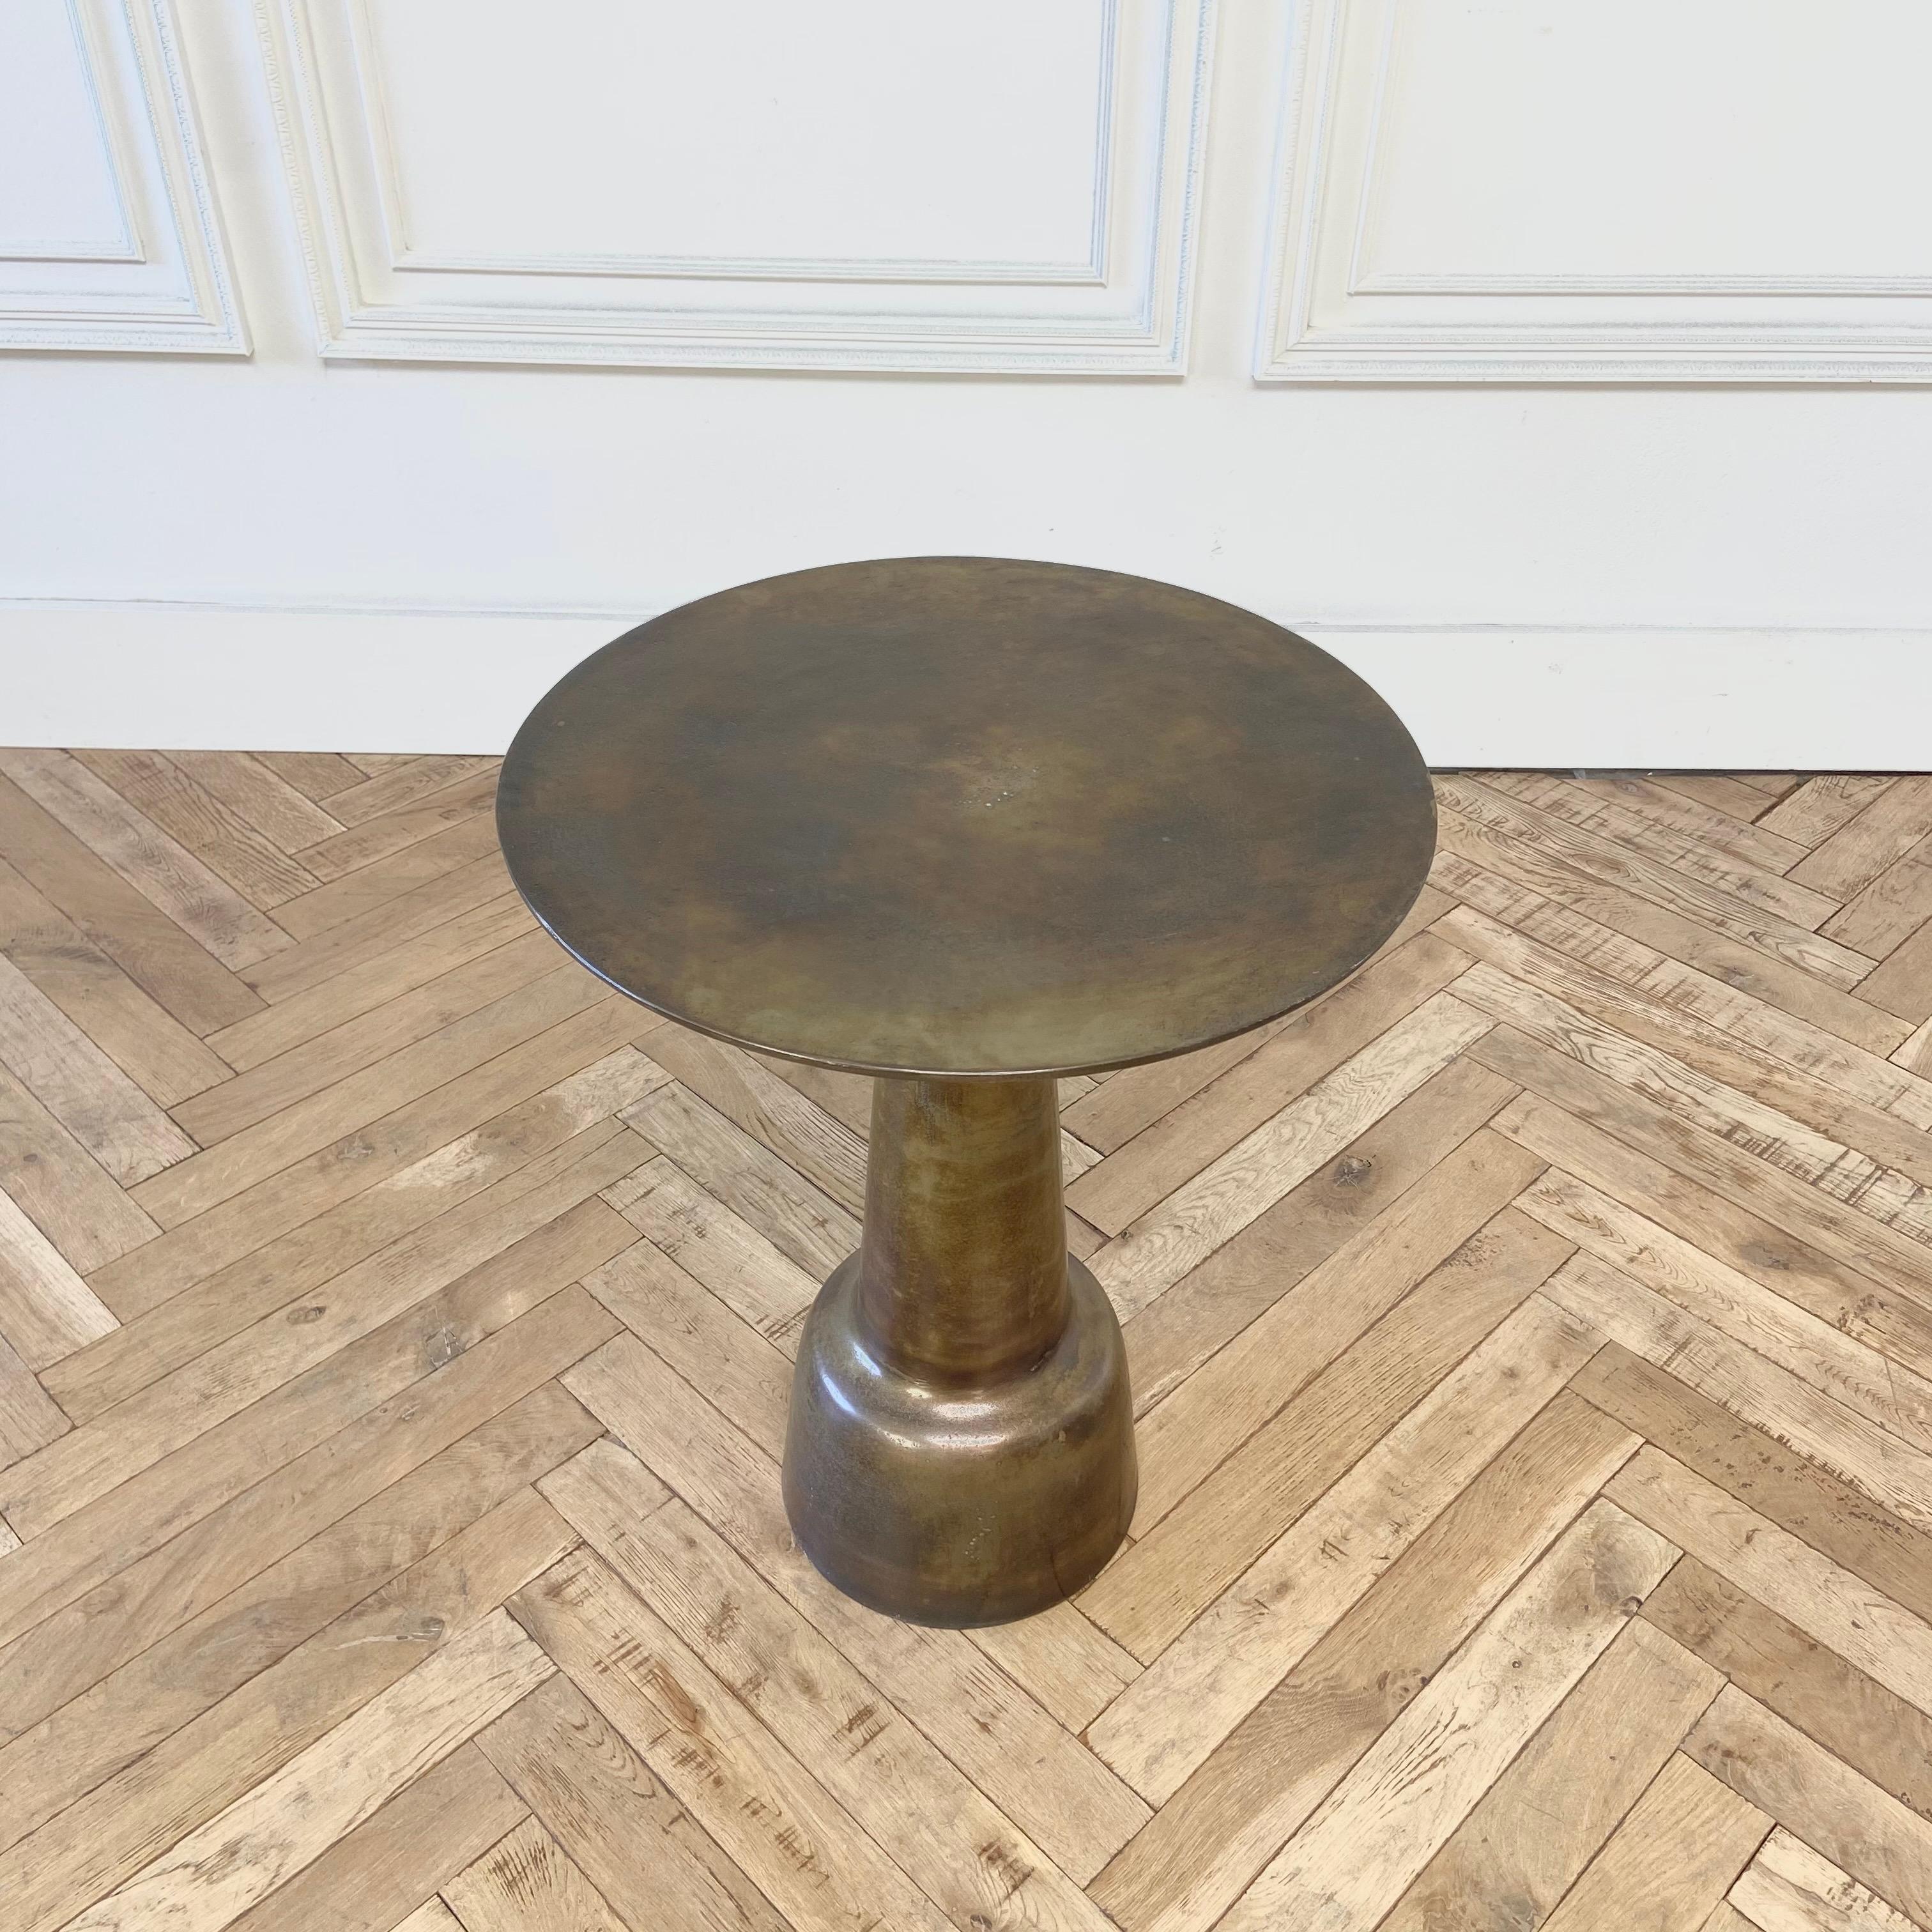 No table is exact, these beautiful side tables have an
Antique appeal, with its aged metal looking finish. The finish is bronze, pewter, and brass with aged pitted patina. Each one with its own unique finish.
Size:
21.5” Rd. x 26.25